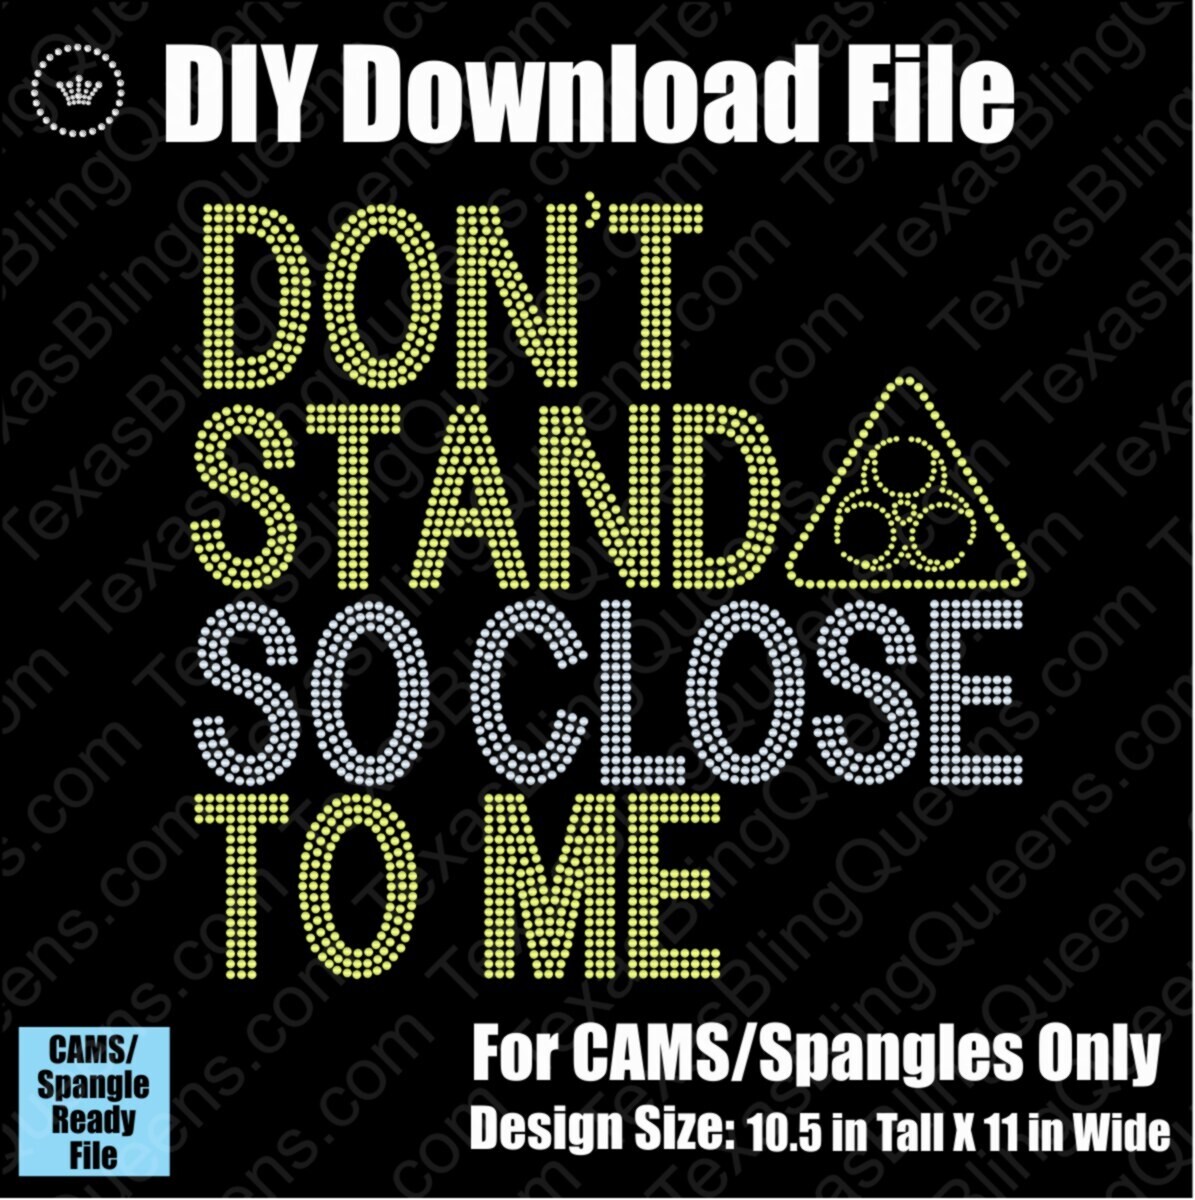 Don't Stand So Close To Me Download File - CAMS/ProSpangle